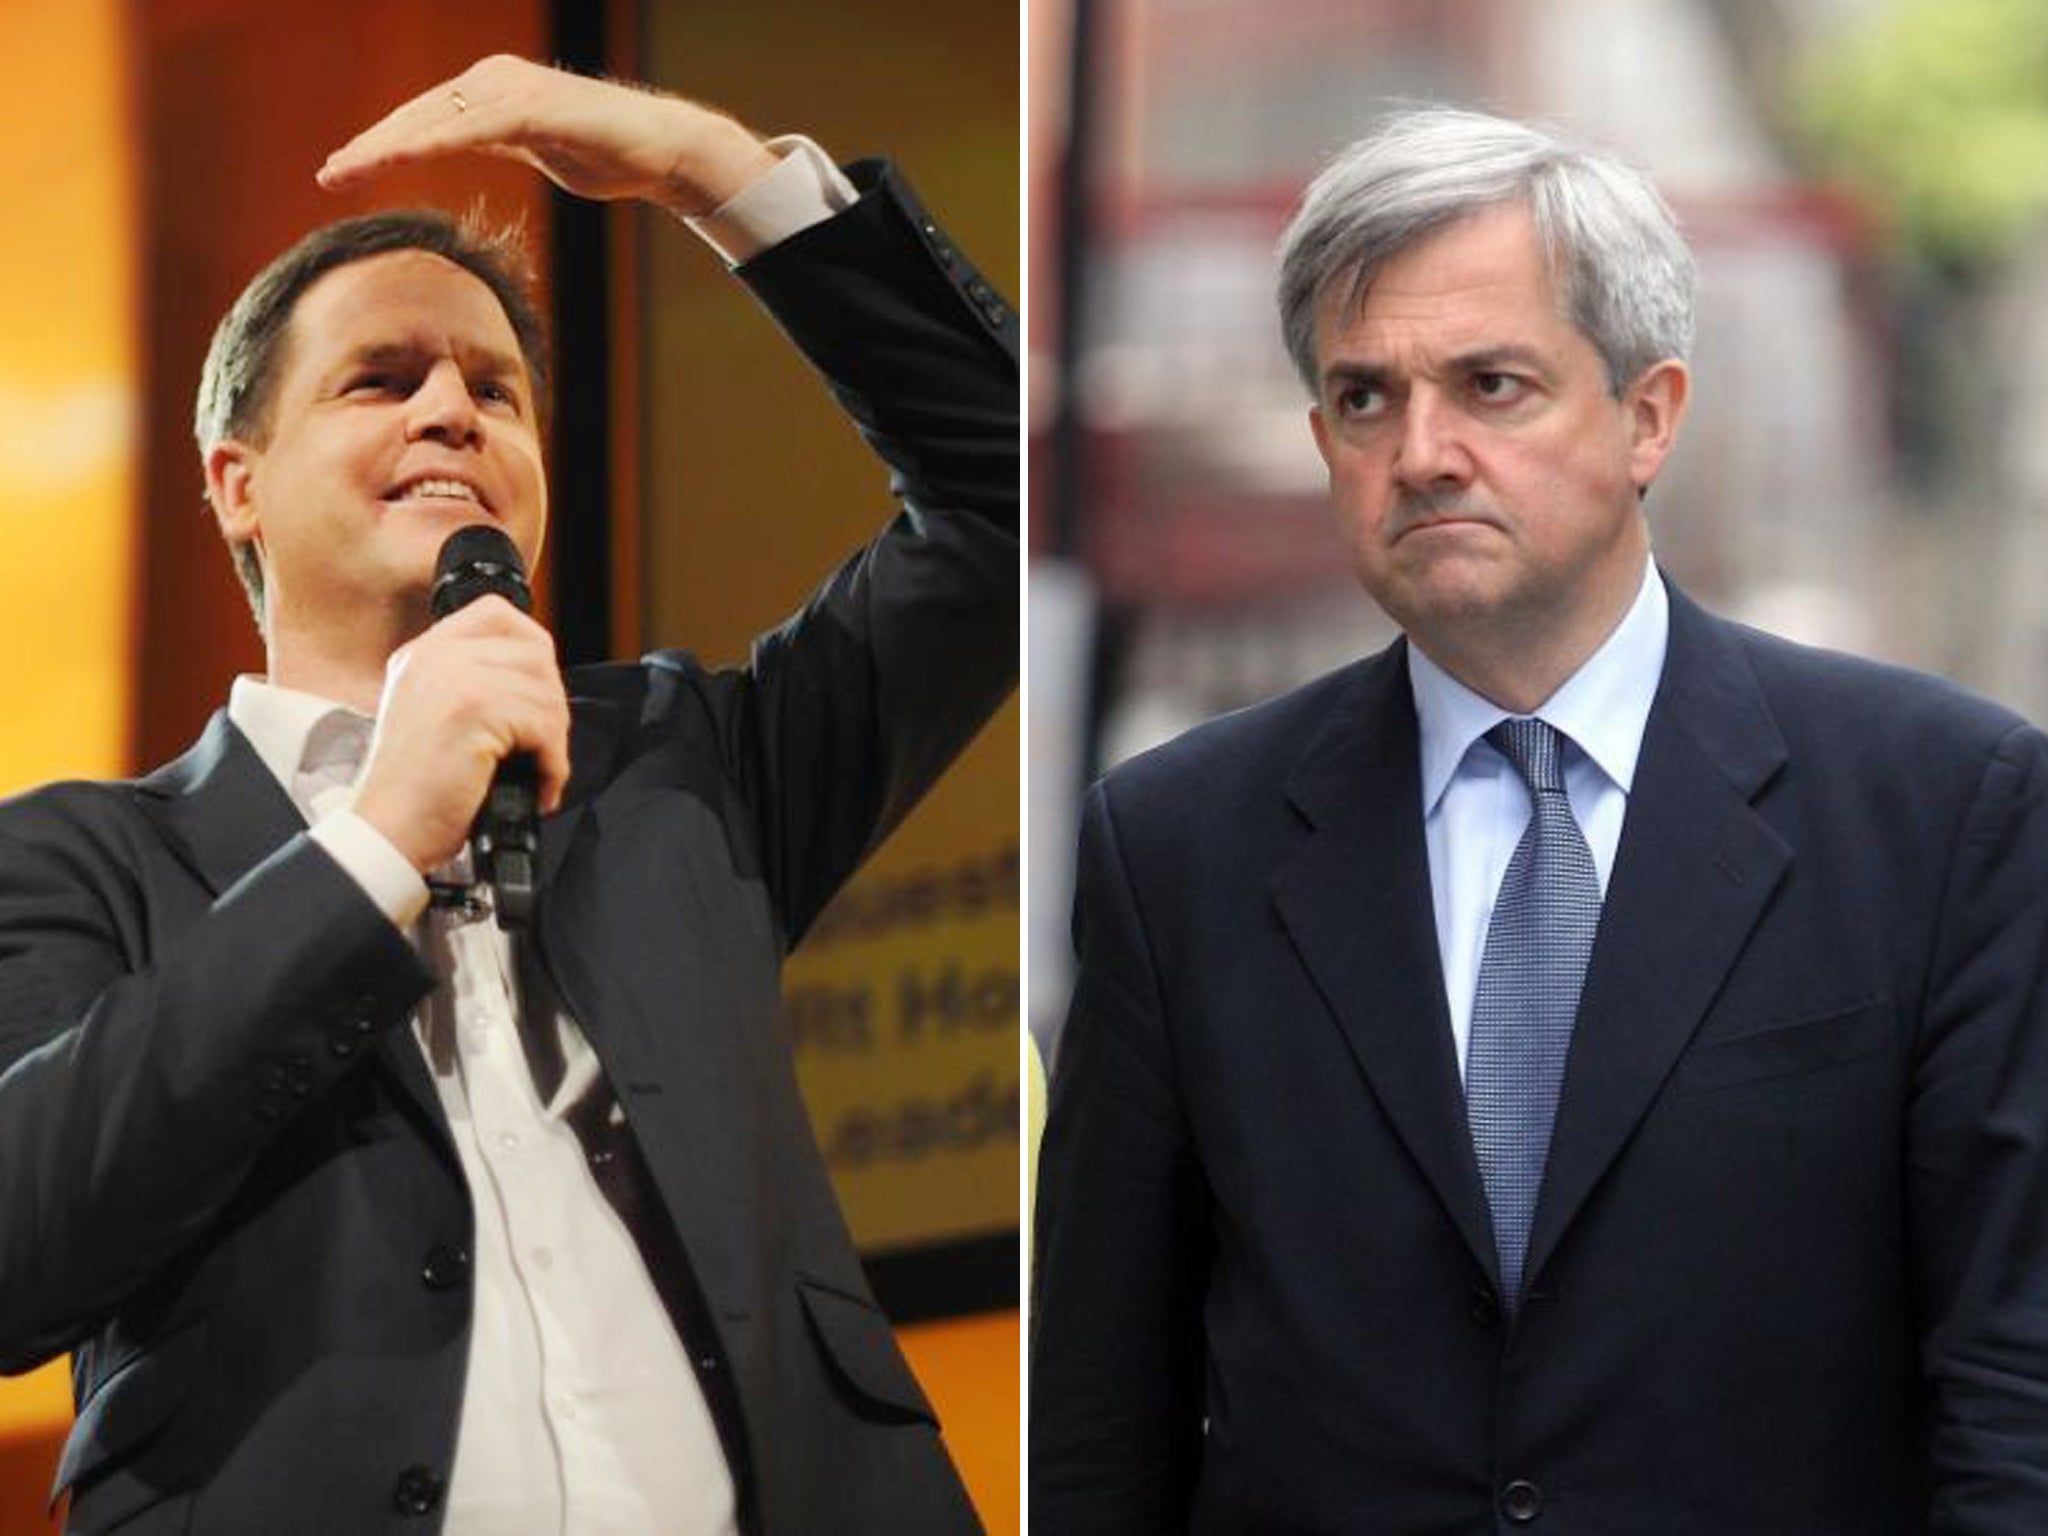 Nick Clegg refused to condone Chris Huhne's comments about the UK press